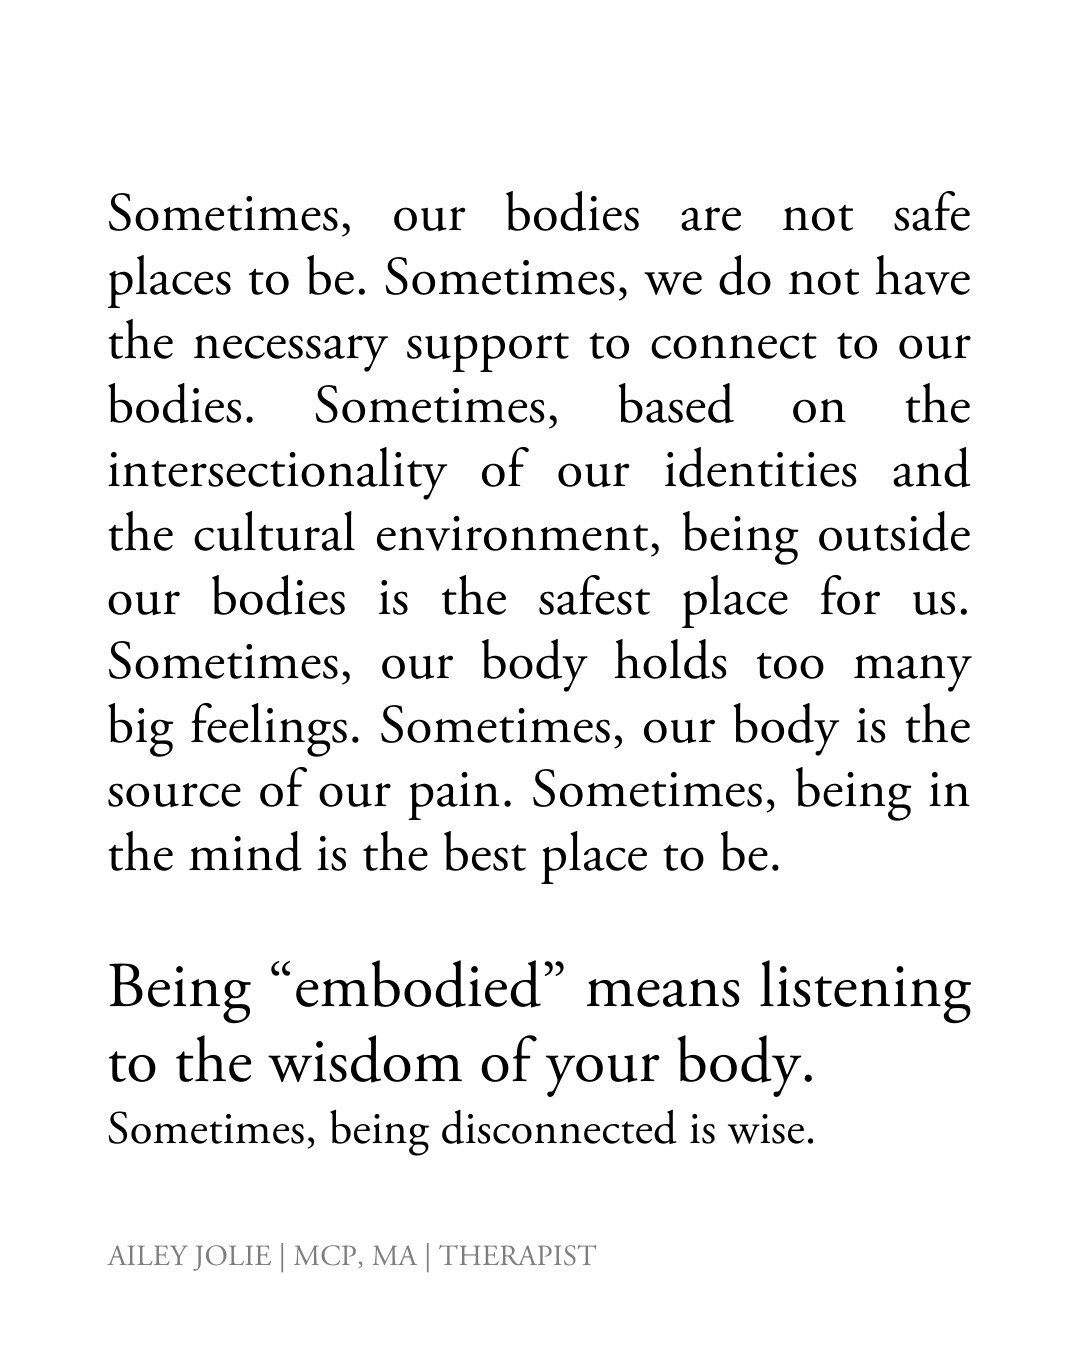 Your body, it holds too much. 

It echoes your deepest fears, your sharpest pains, your intergenerational history, and your most intimate insights.

To be 'embodied' is to hear your body's silent whispers, to understand when it's time to retreat into